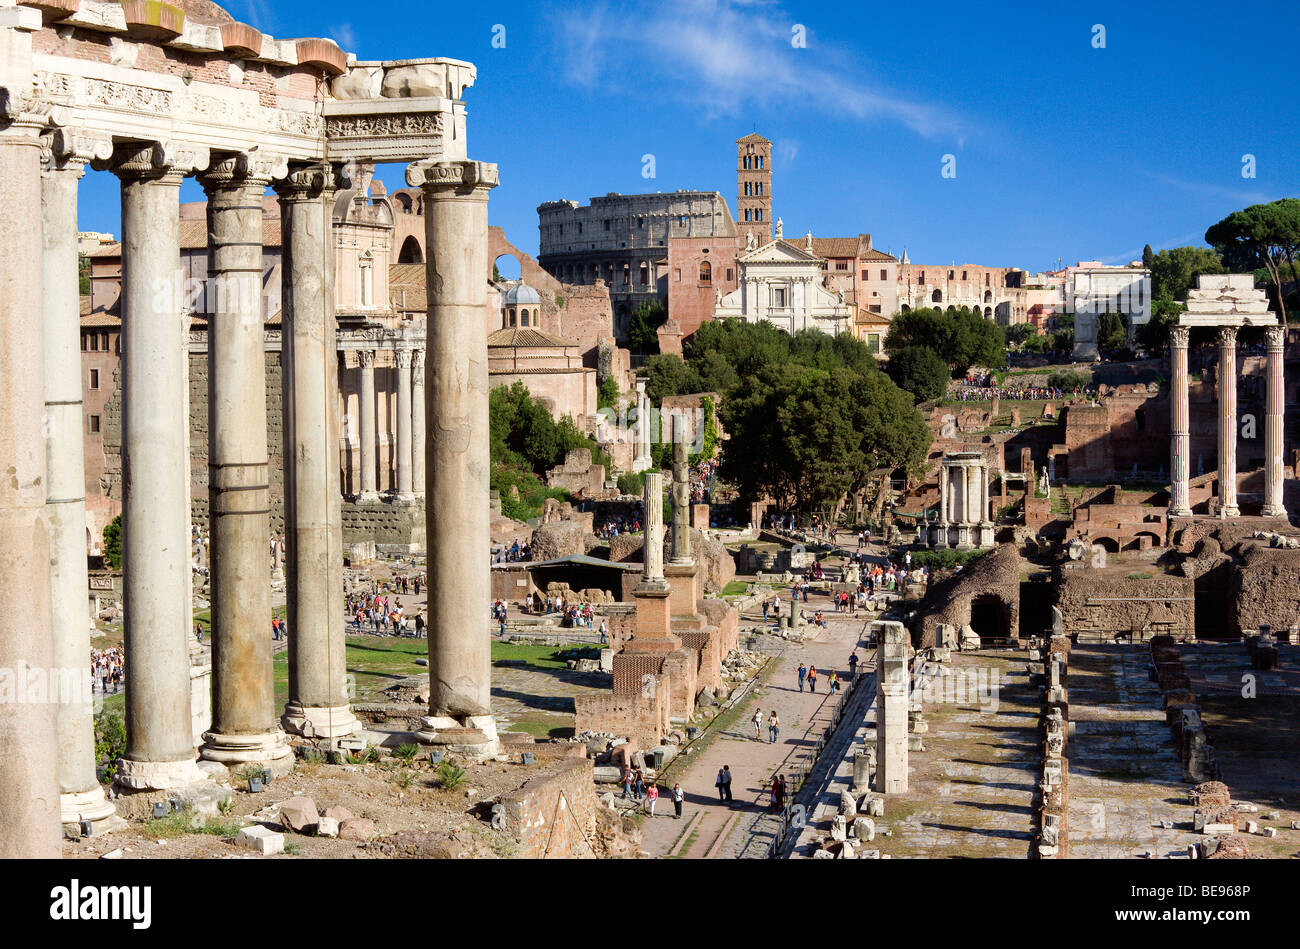 ITALY Rome Lazio Tourists in the Forum. Columns of Temple of Saturn in foreground and Colosseum in distance Stock Photo